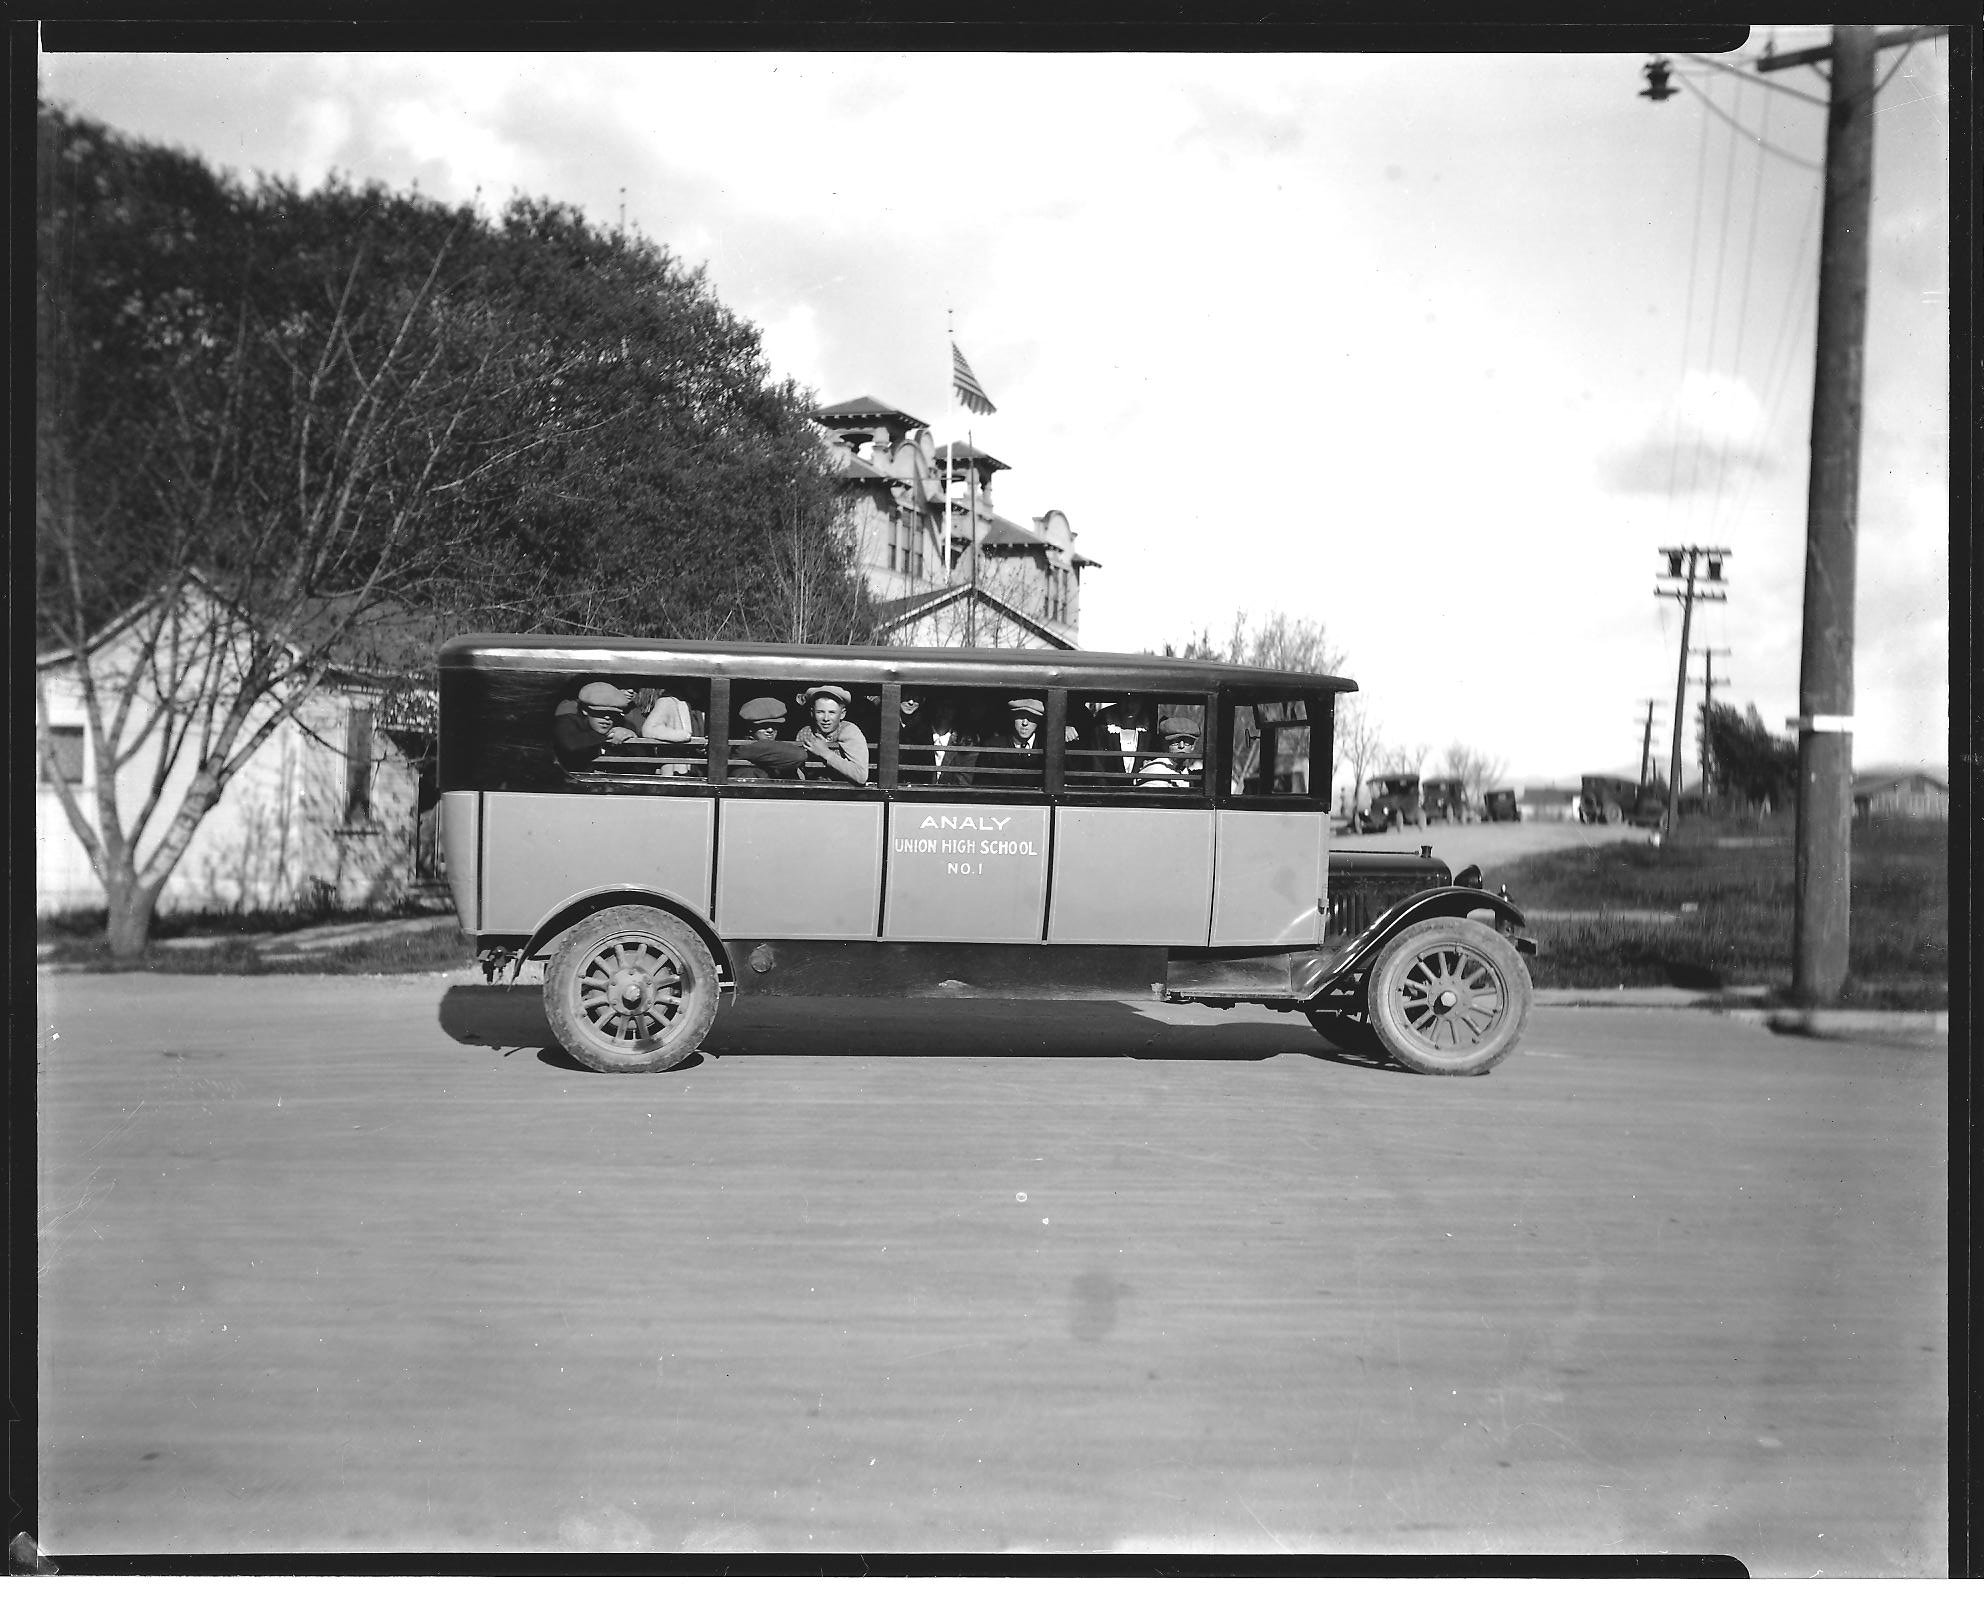 Analy High School Bus No. 1 parked in front of the Analy High School with students on board. Circ. 1920’s